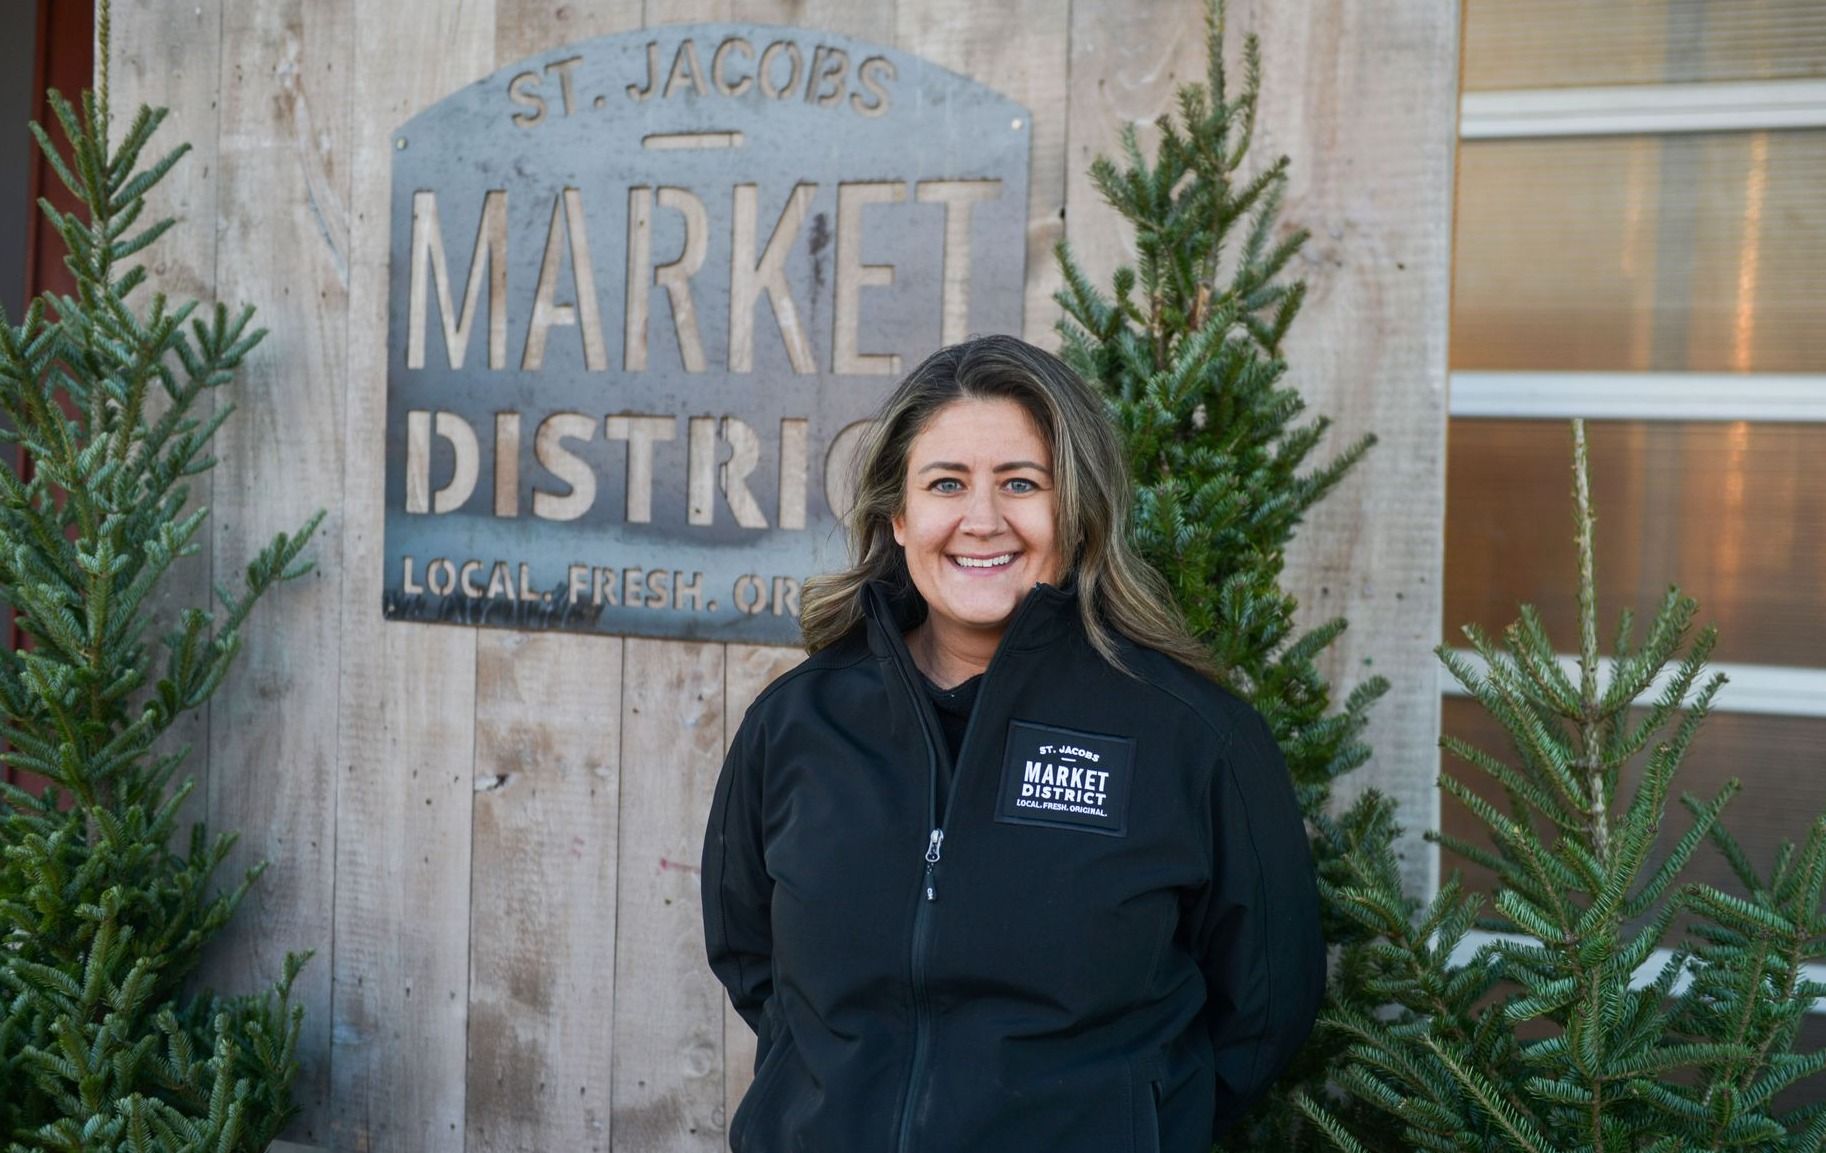                      St. Jacobs Market District embraces the holiday season                             
                     